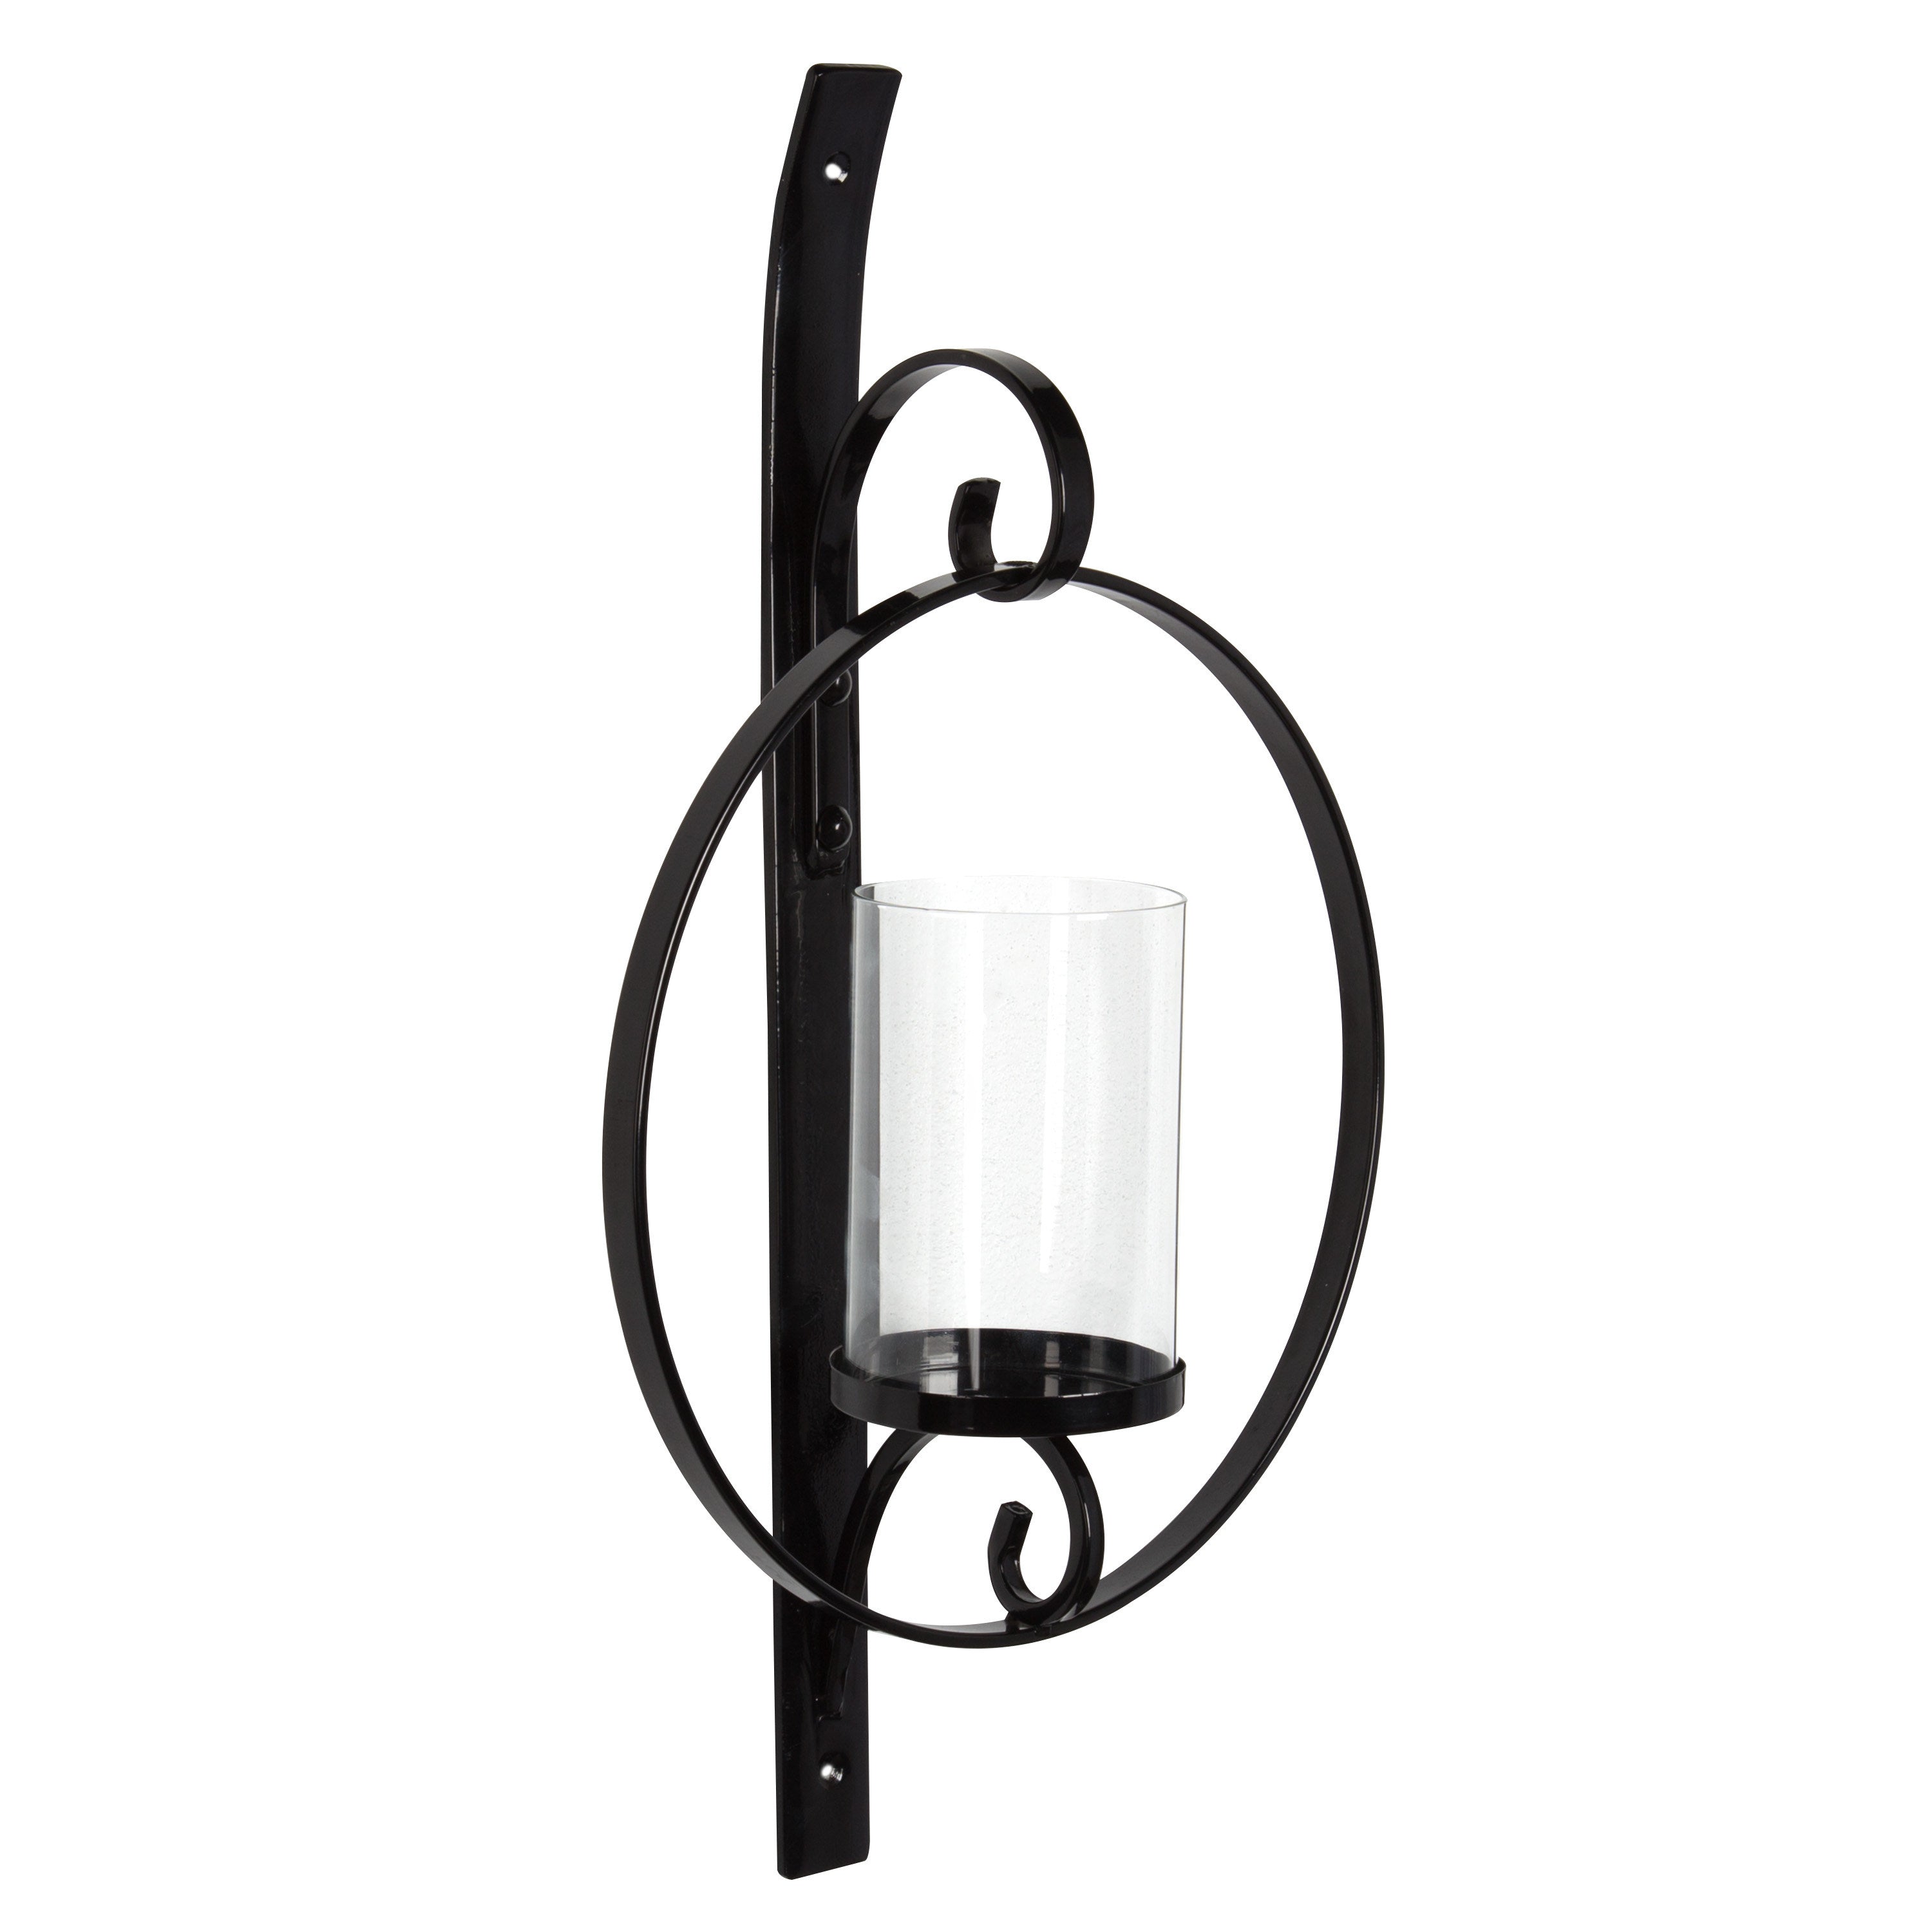 Doria Metal Wall Candle Holder Sconce